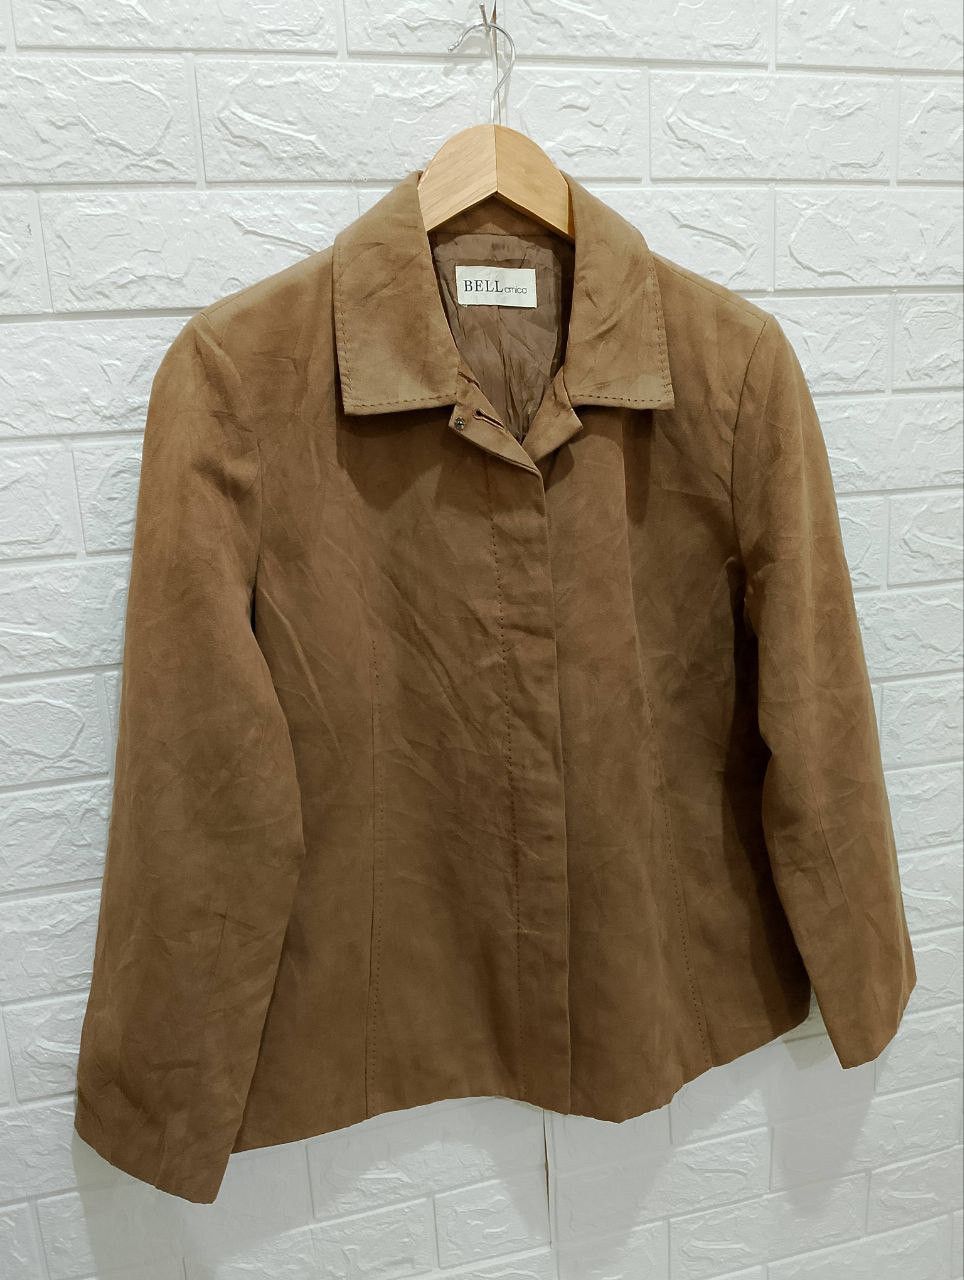 Archival Clothing - BELL AMICA Brown Japan Brand Jacket - 4